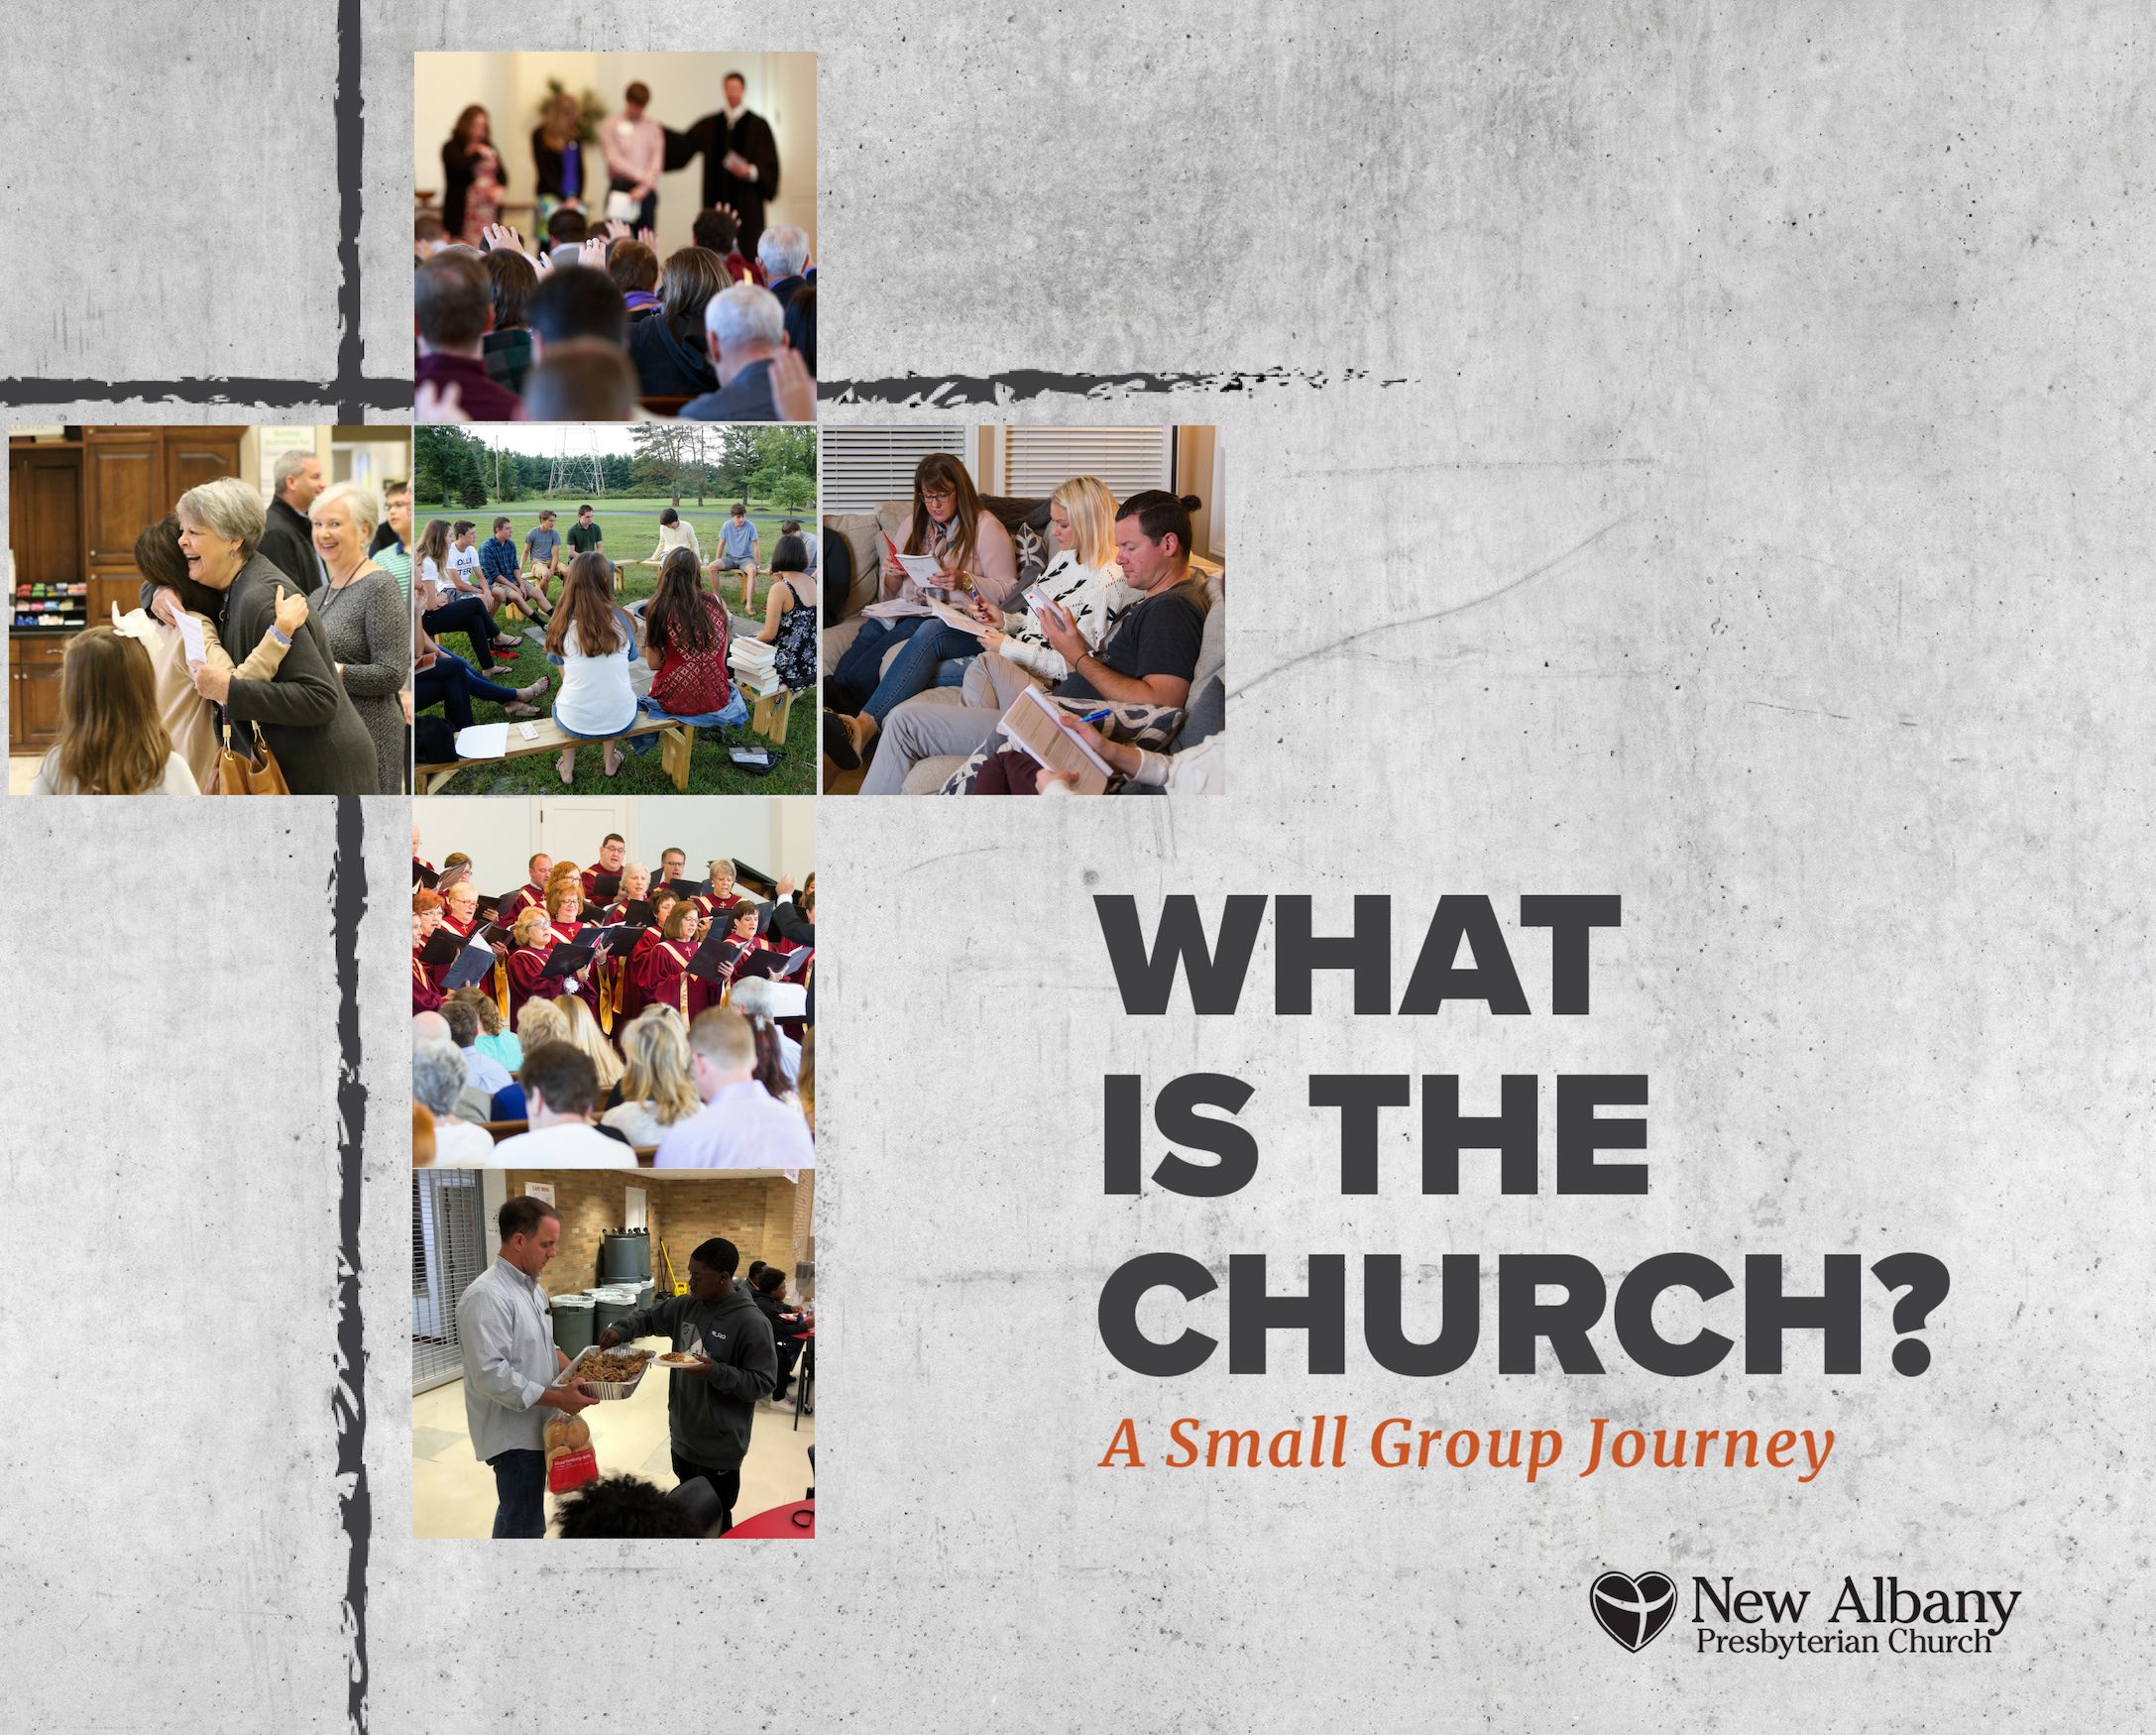 What is the Church? Who Leads the Church?